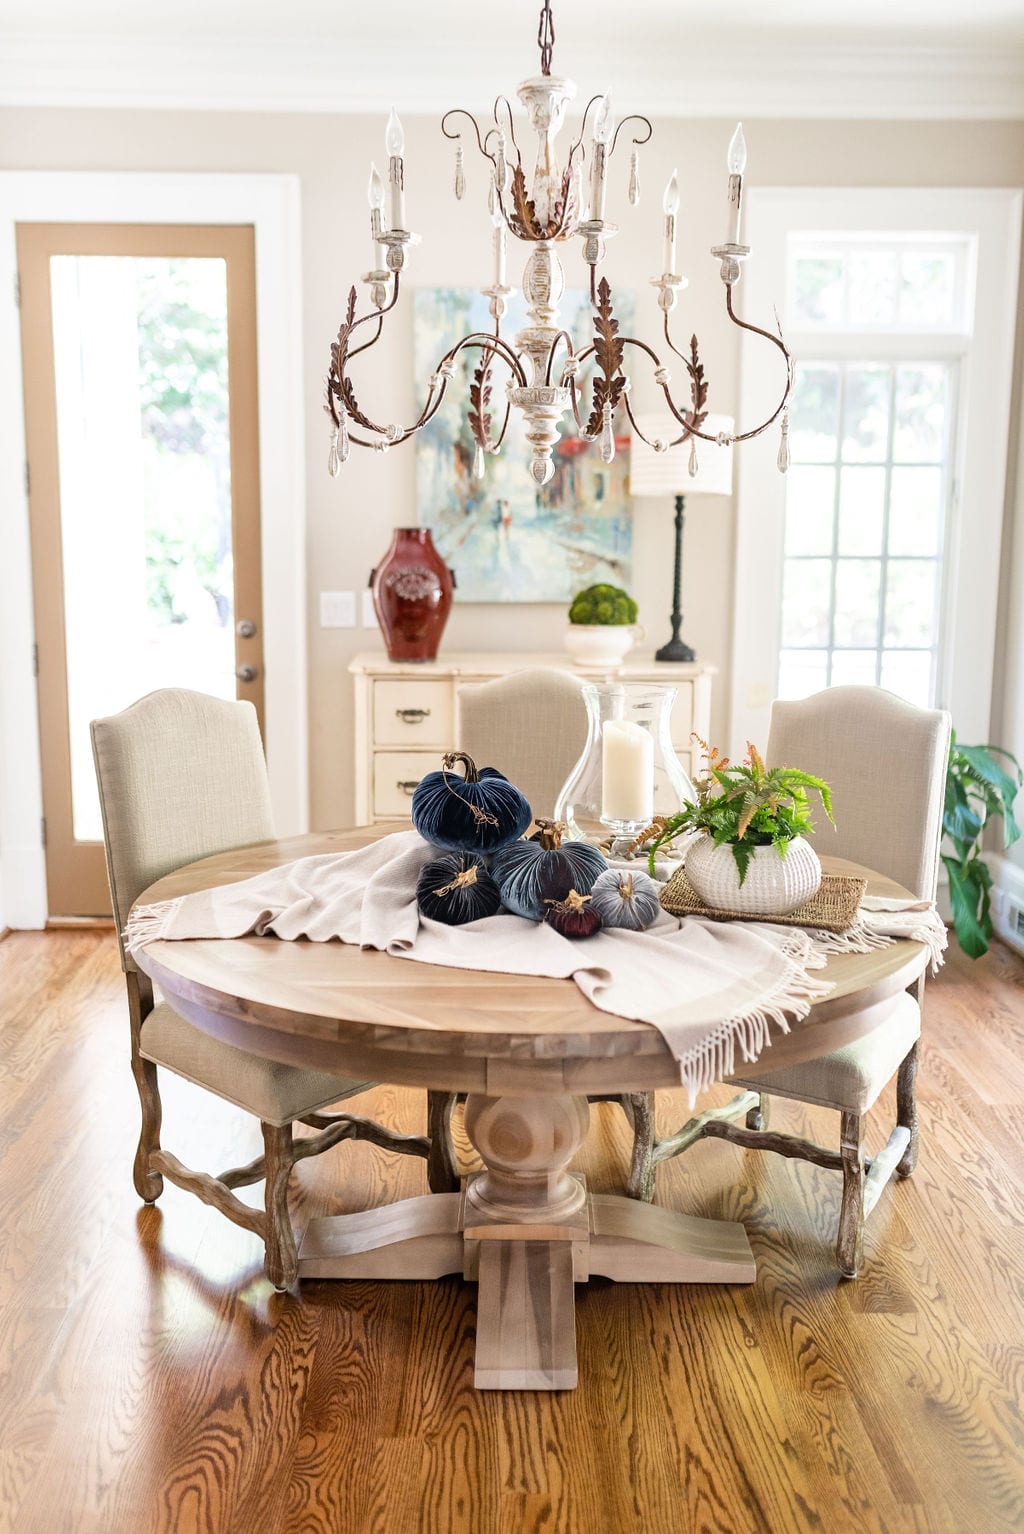 Thanksgiving Table set up with Plush Pumpkin. Rustic kitchen with chandelier and round wood dining room table.